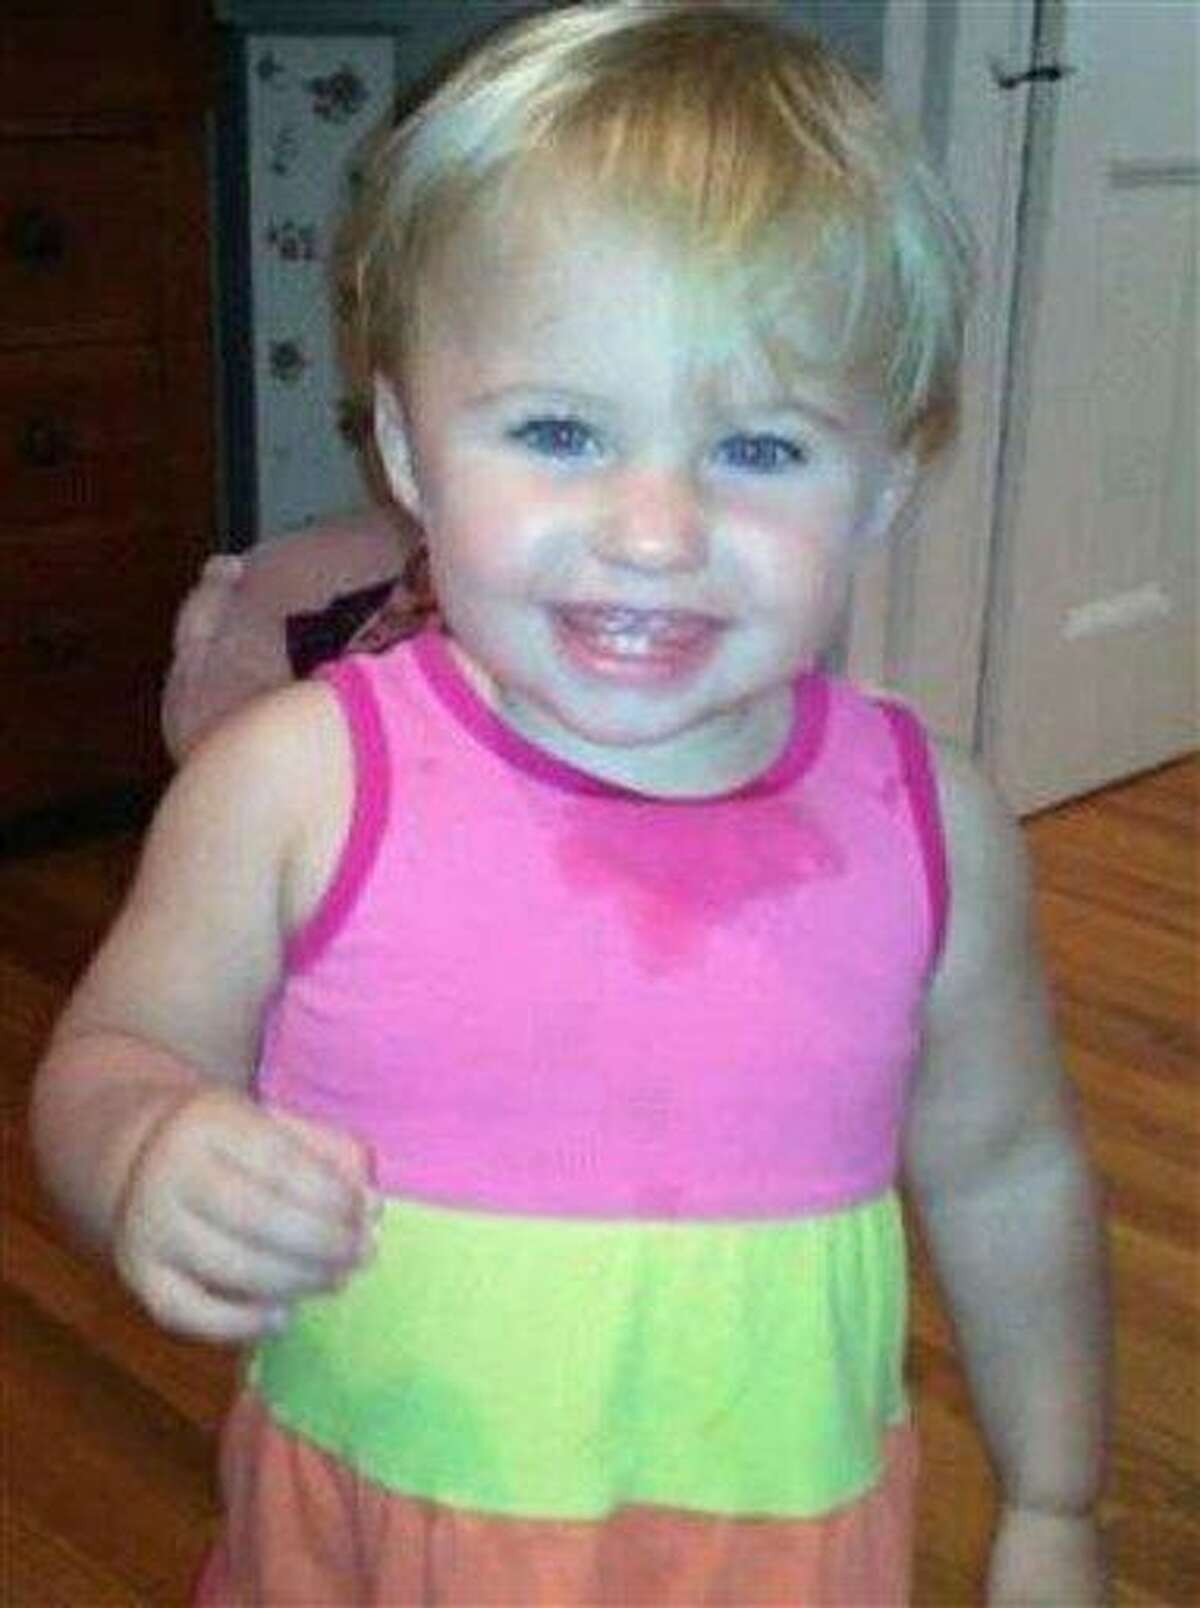 This undated file photo obtained from a Facebook page shows missing toddler Ayla Reynolds. Investigators said Sunday that some of the blood found in the Maine home where Ayla was last seen on Dec. 17 belonged to the little girl. Associated Press